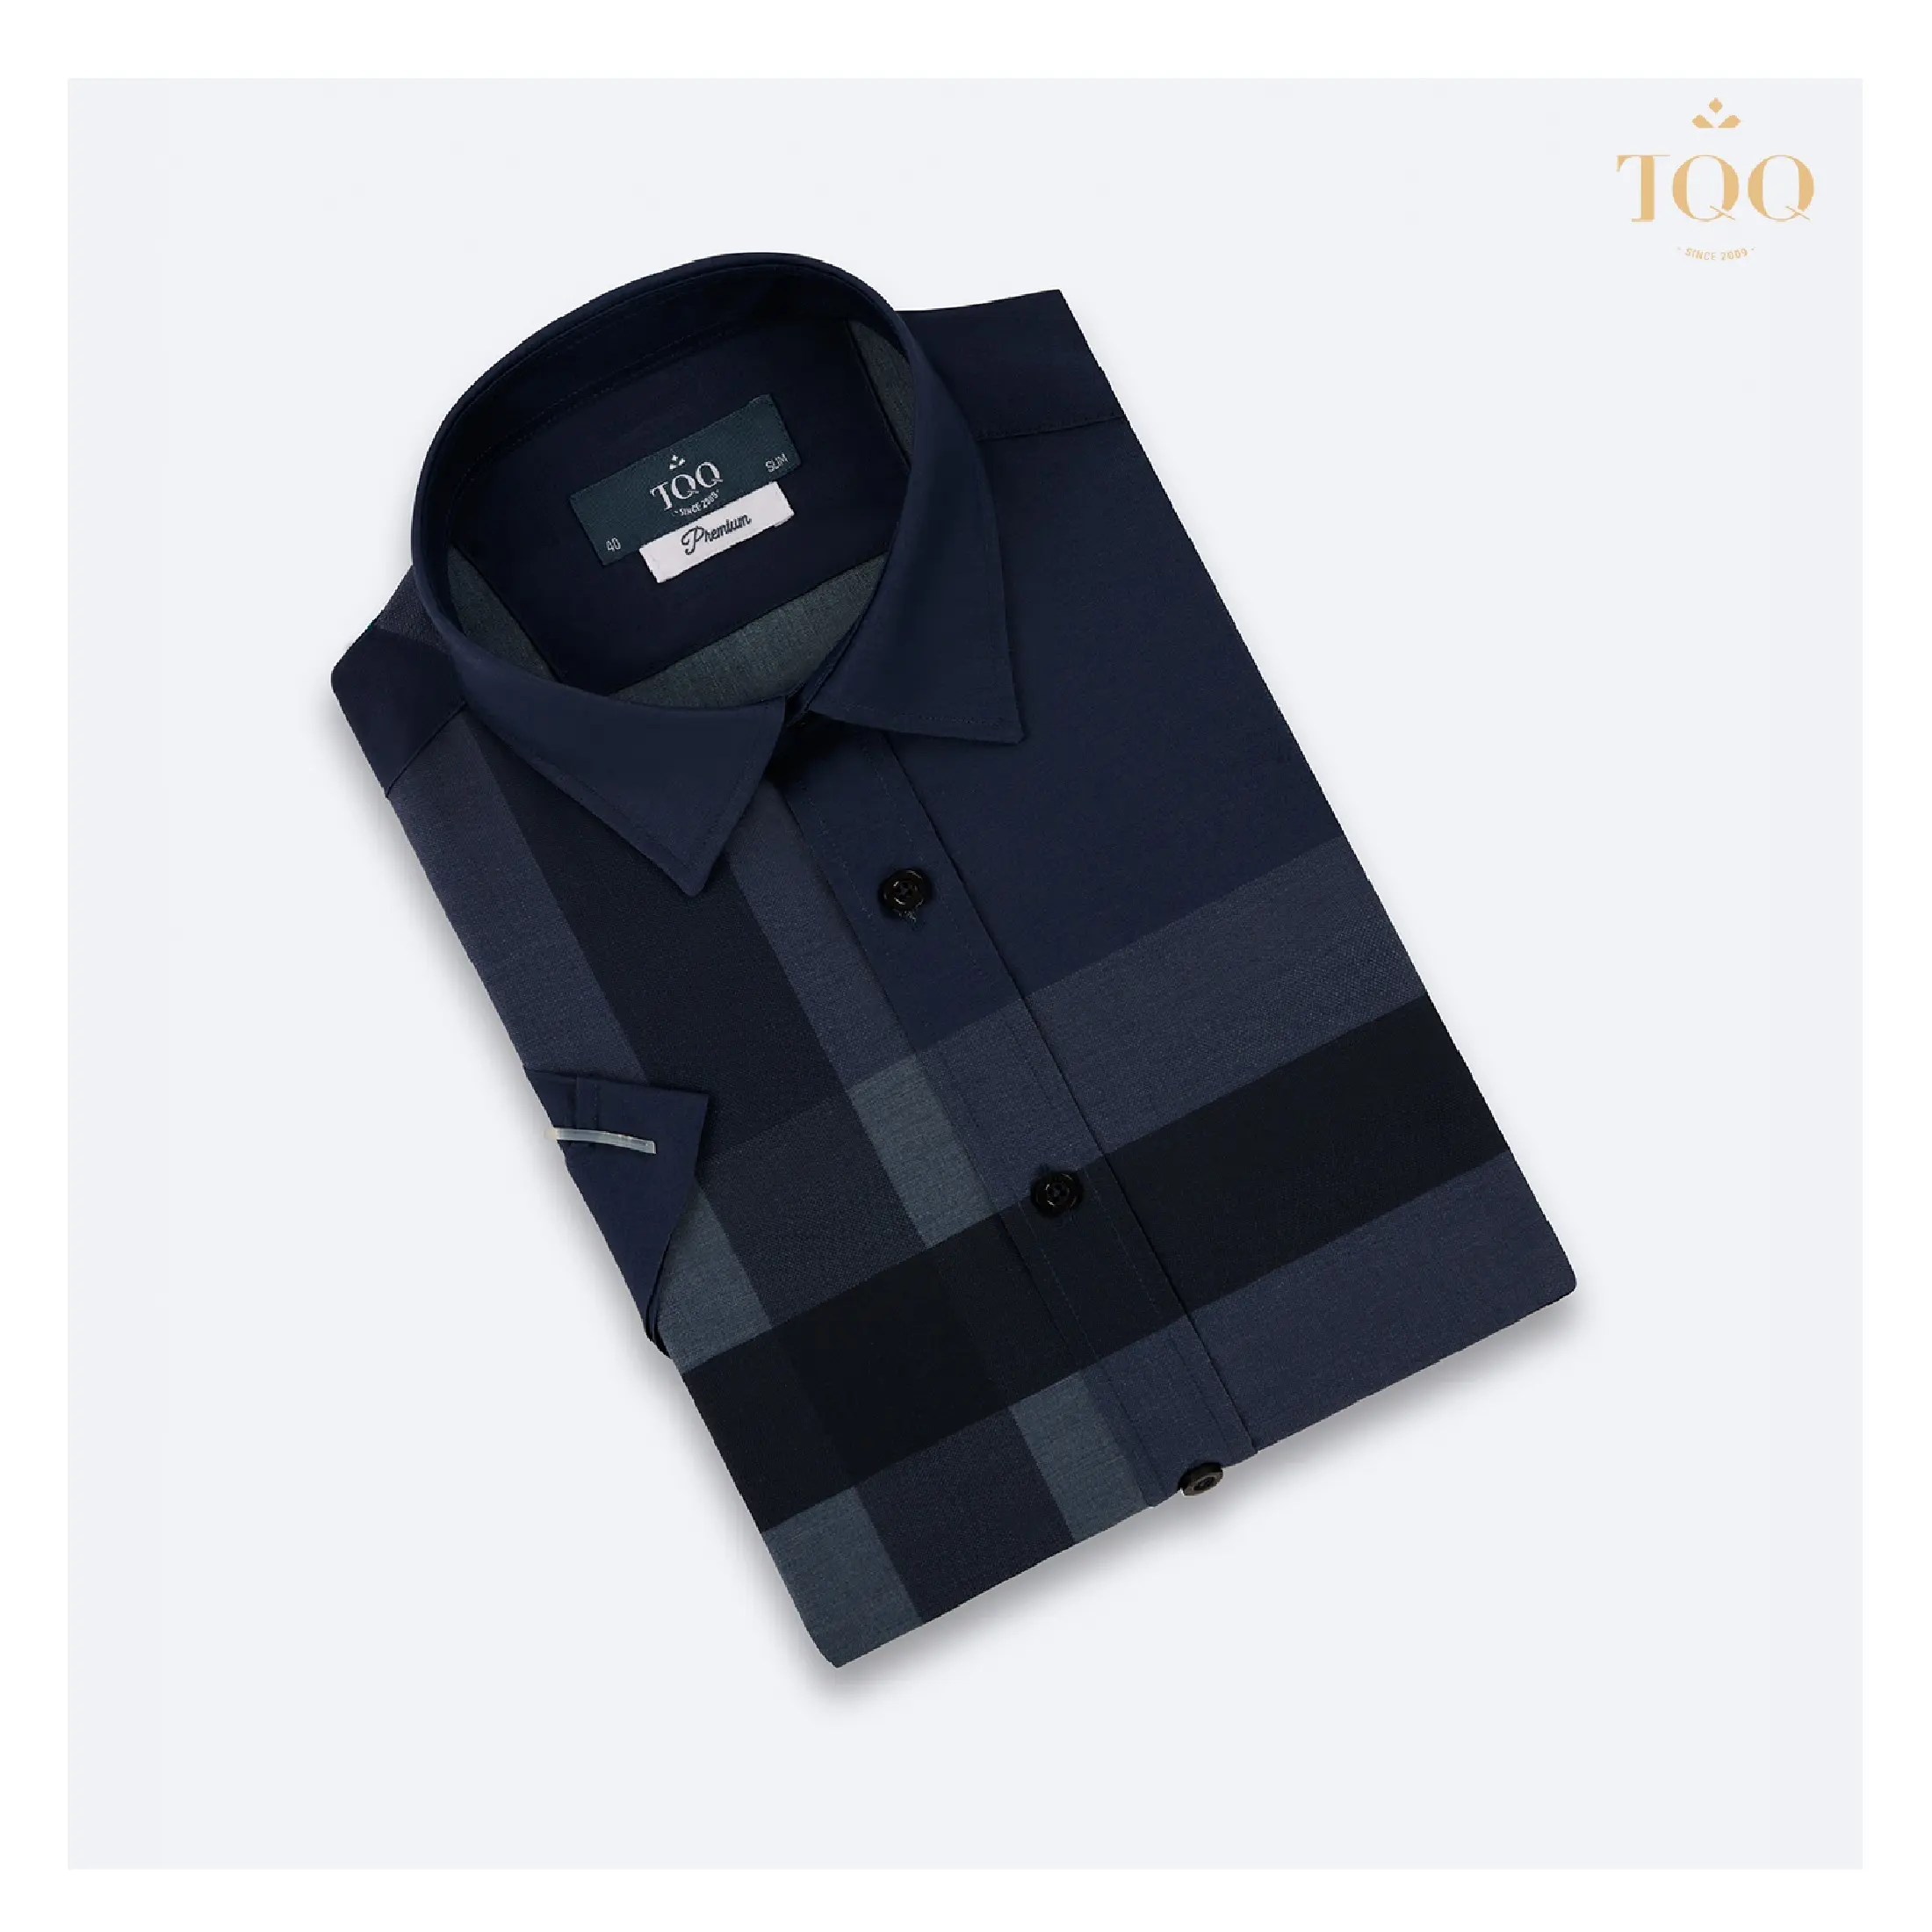 Anti-wrinkle Polyester shirts for men printed Short Sleeve Checked Print Dress Shirt in Navy from Vietnam Viscose - Vacation